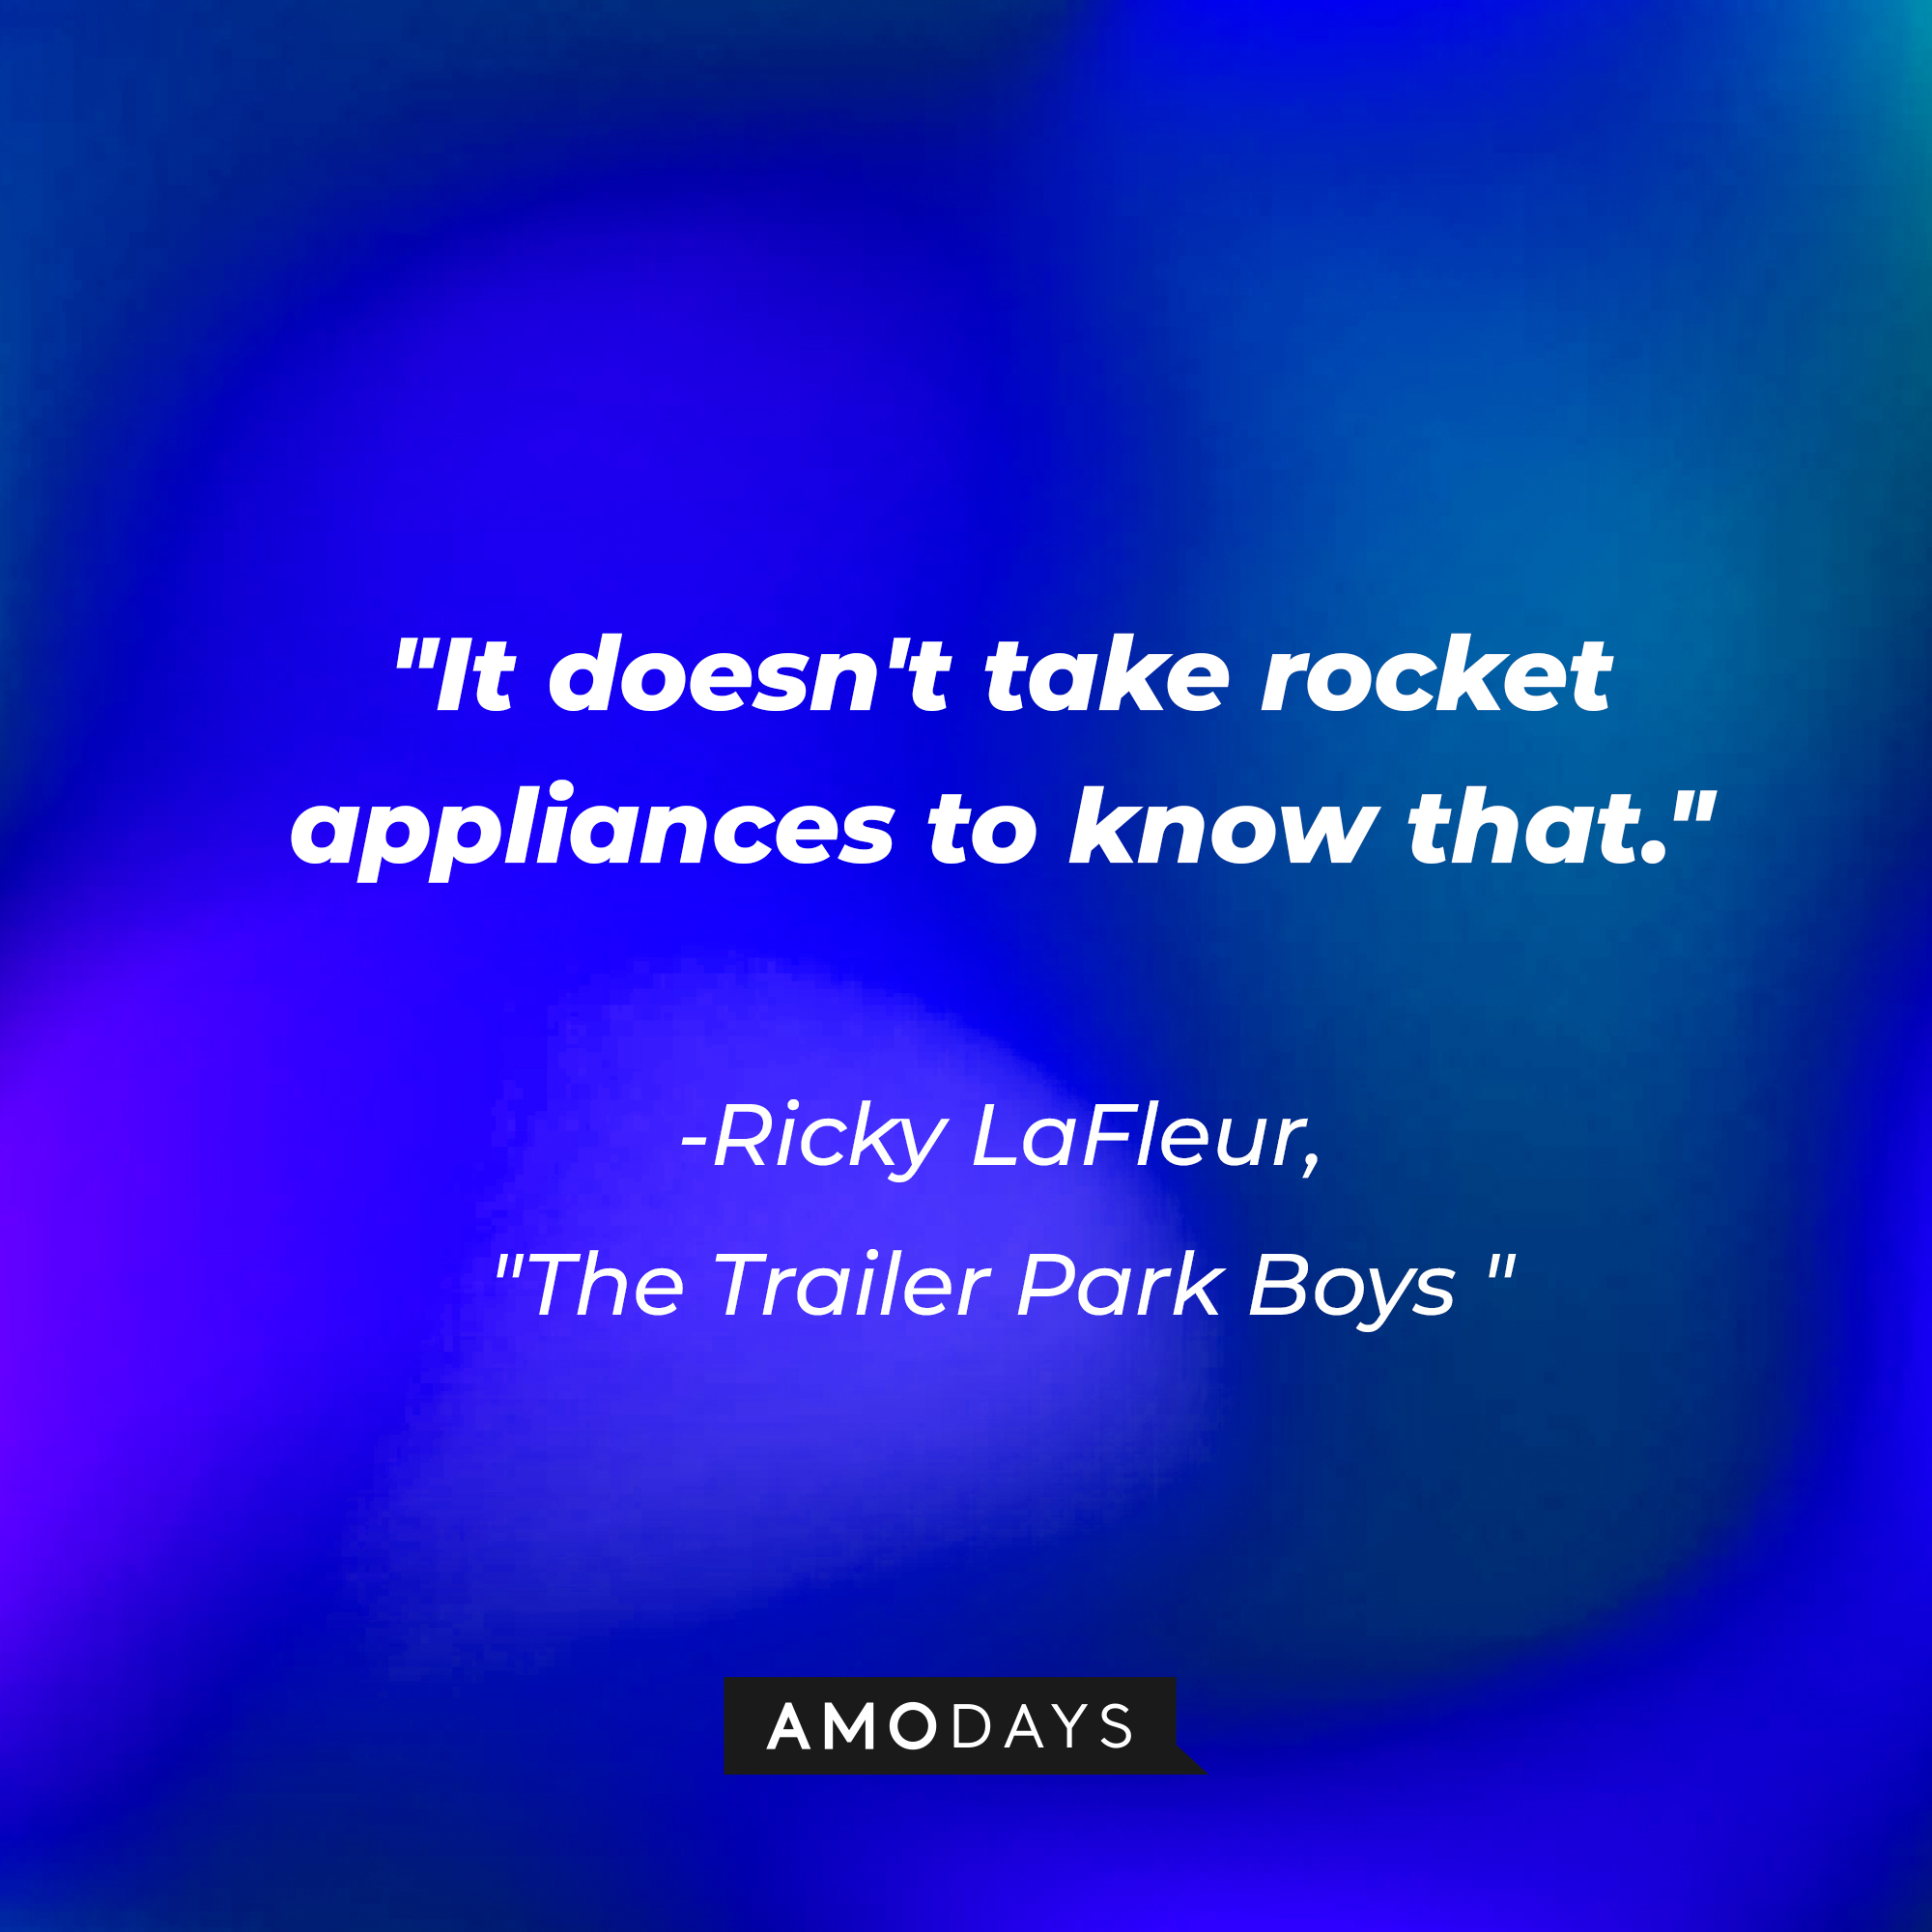 Ricky LaFleur with his quote: "It doesn't take rocket appliances to know that." | Source: AmoDays